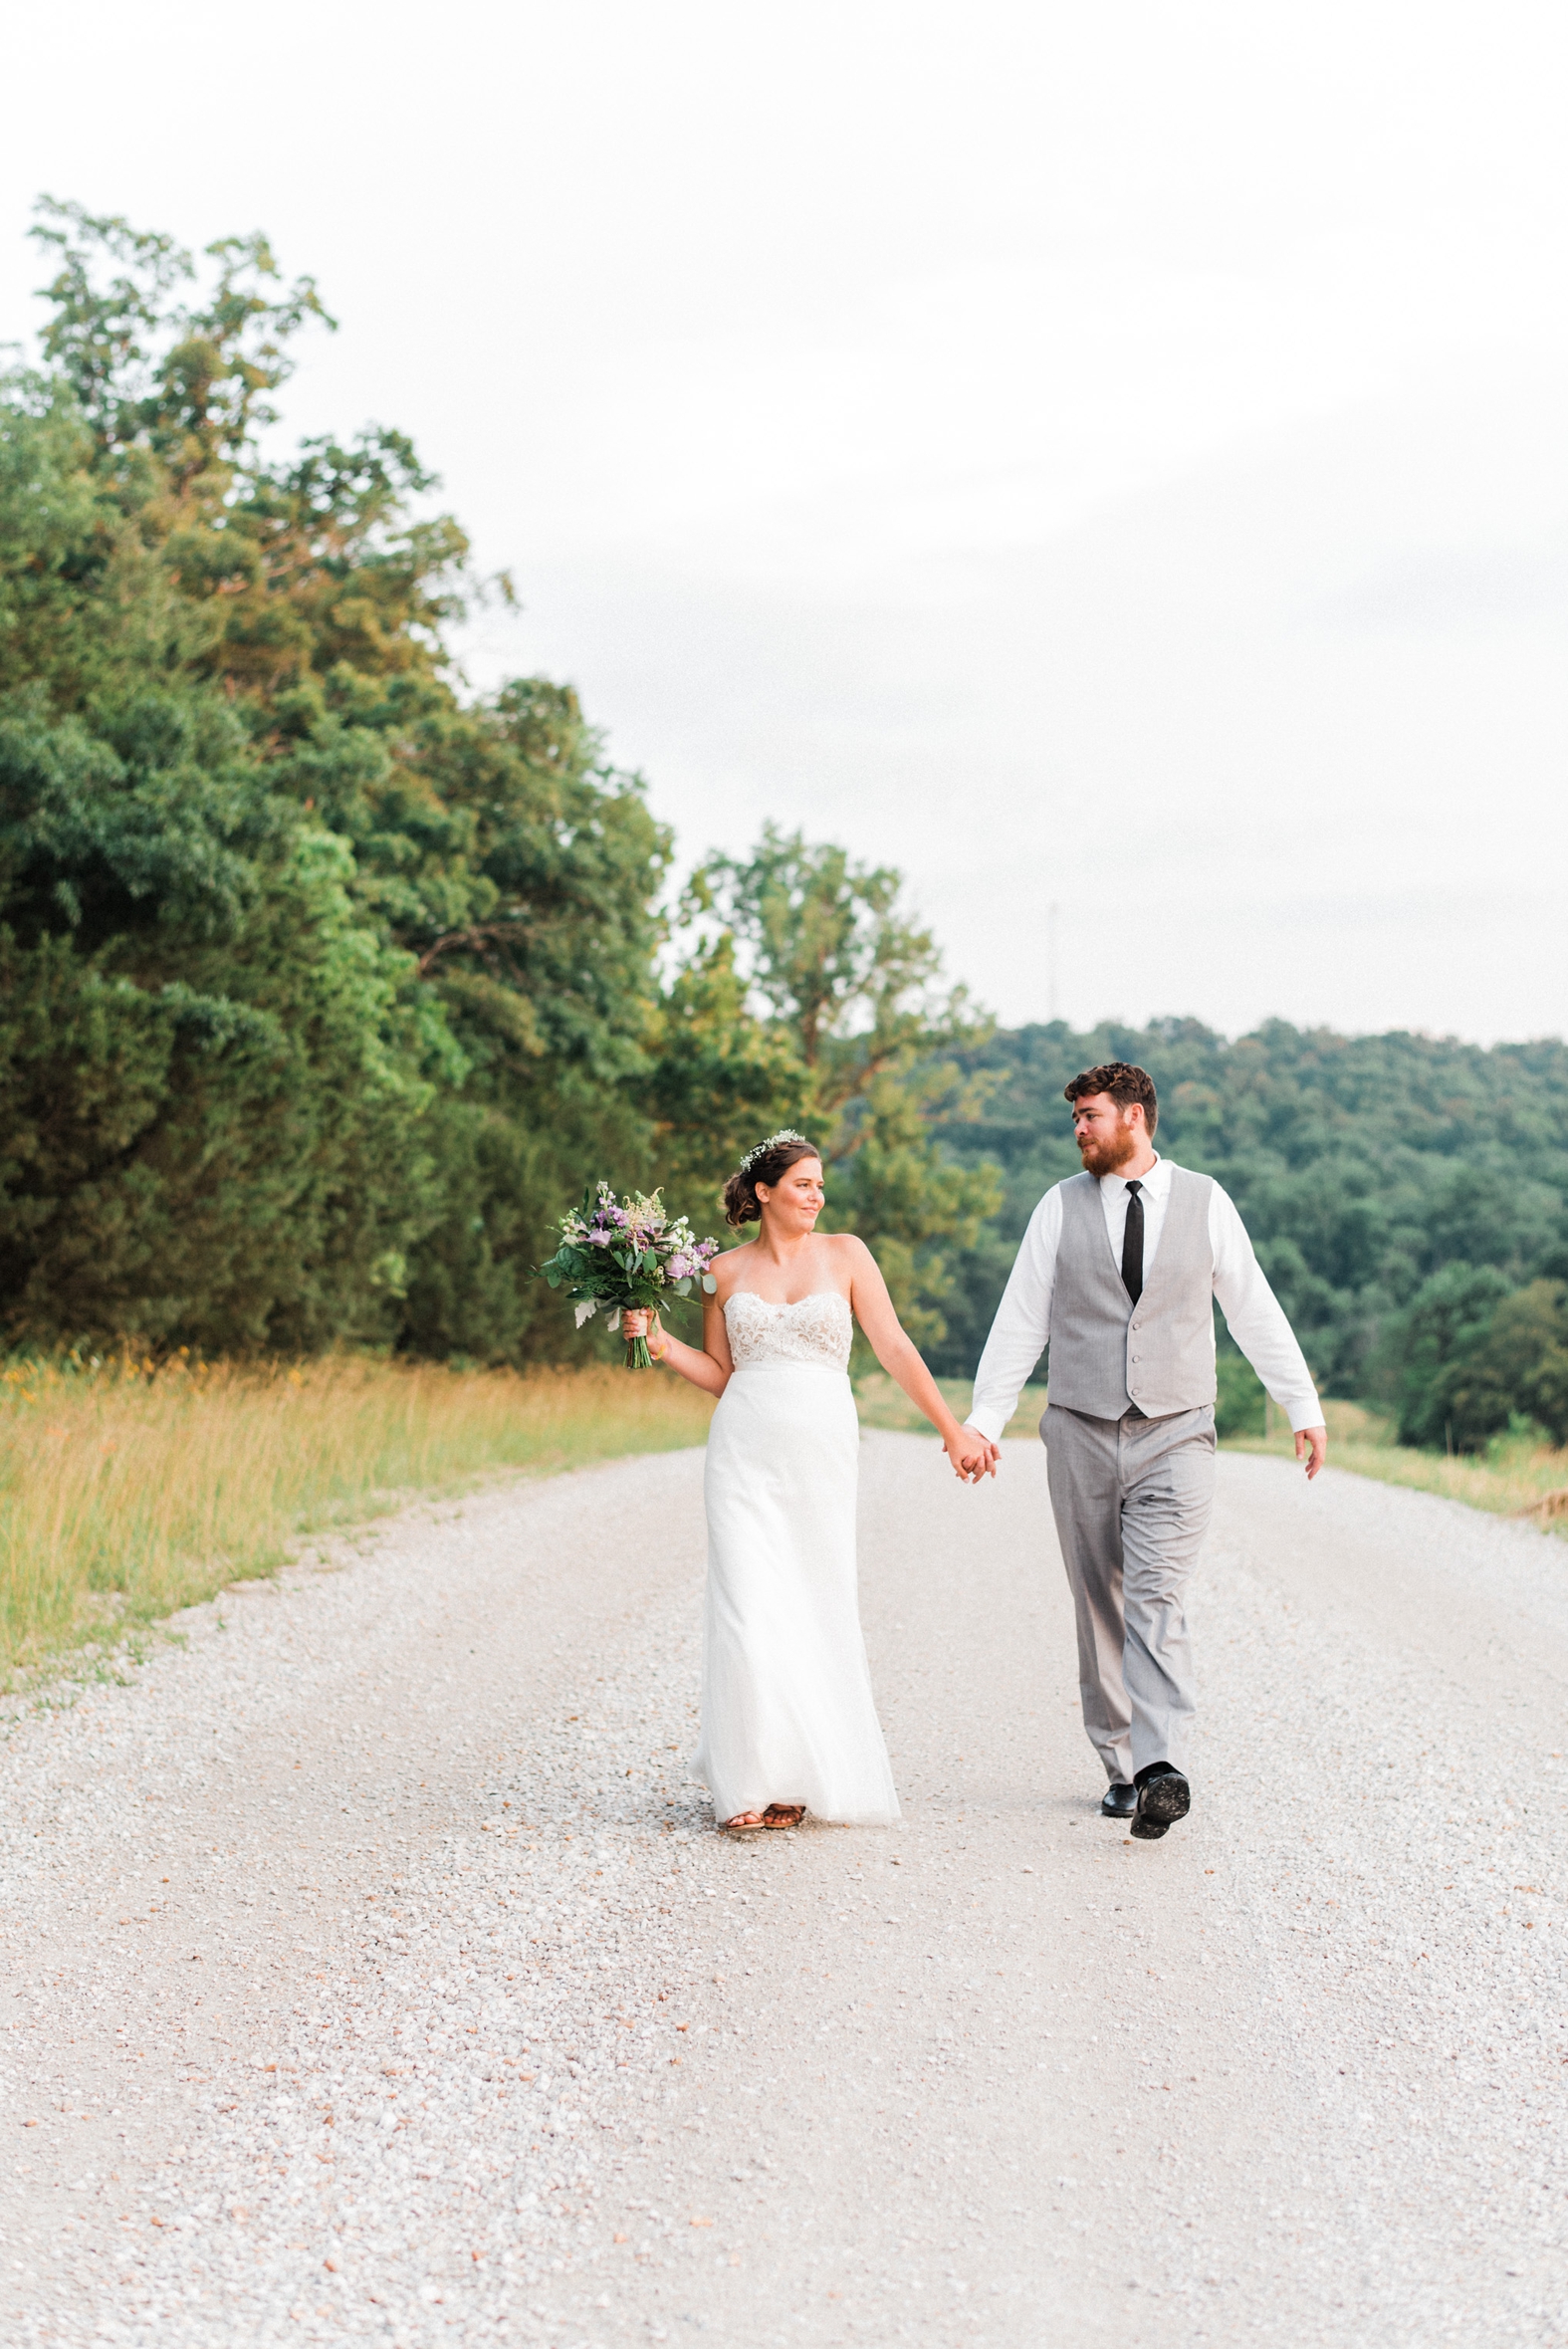 Bride and groom walking along road at Little Piney Lodge in Hermann, MO. Bride in strapless sweetheart lace wedding gown groom in gray suit with black tie.